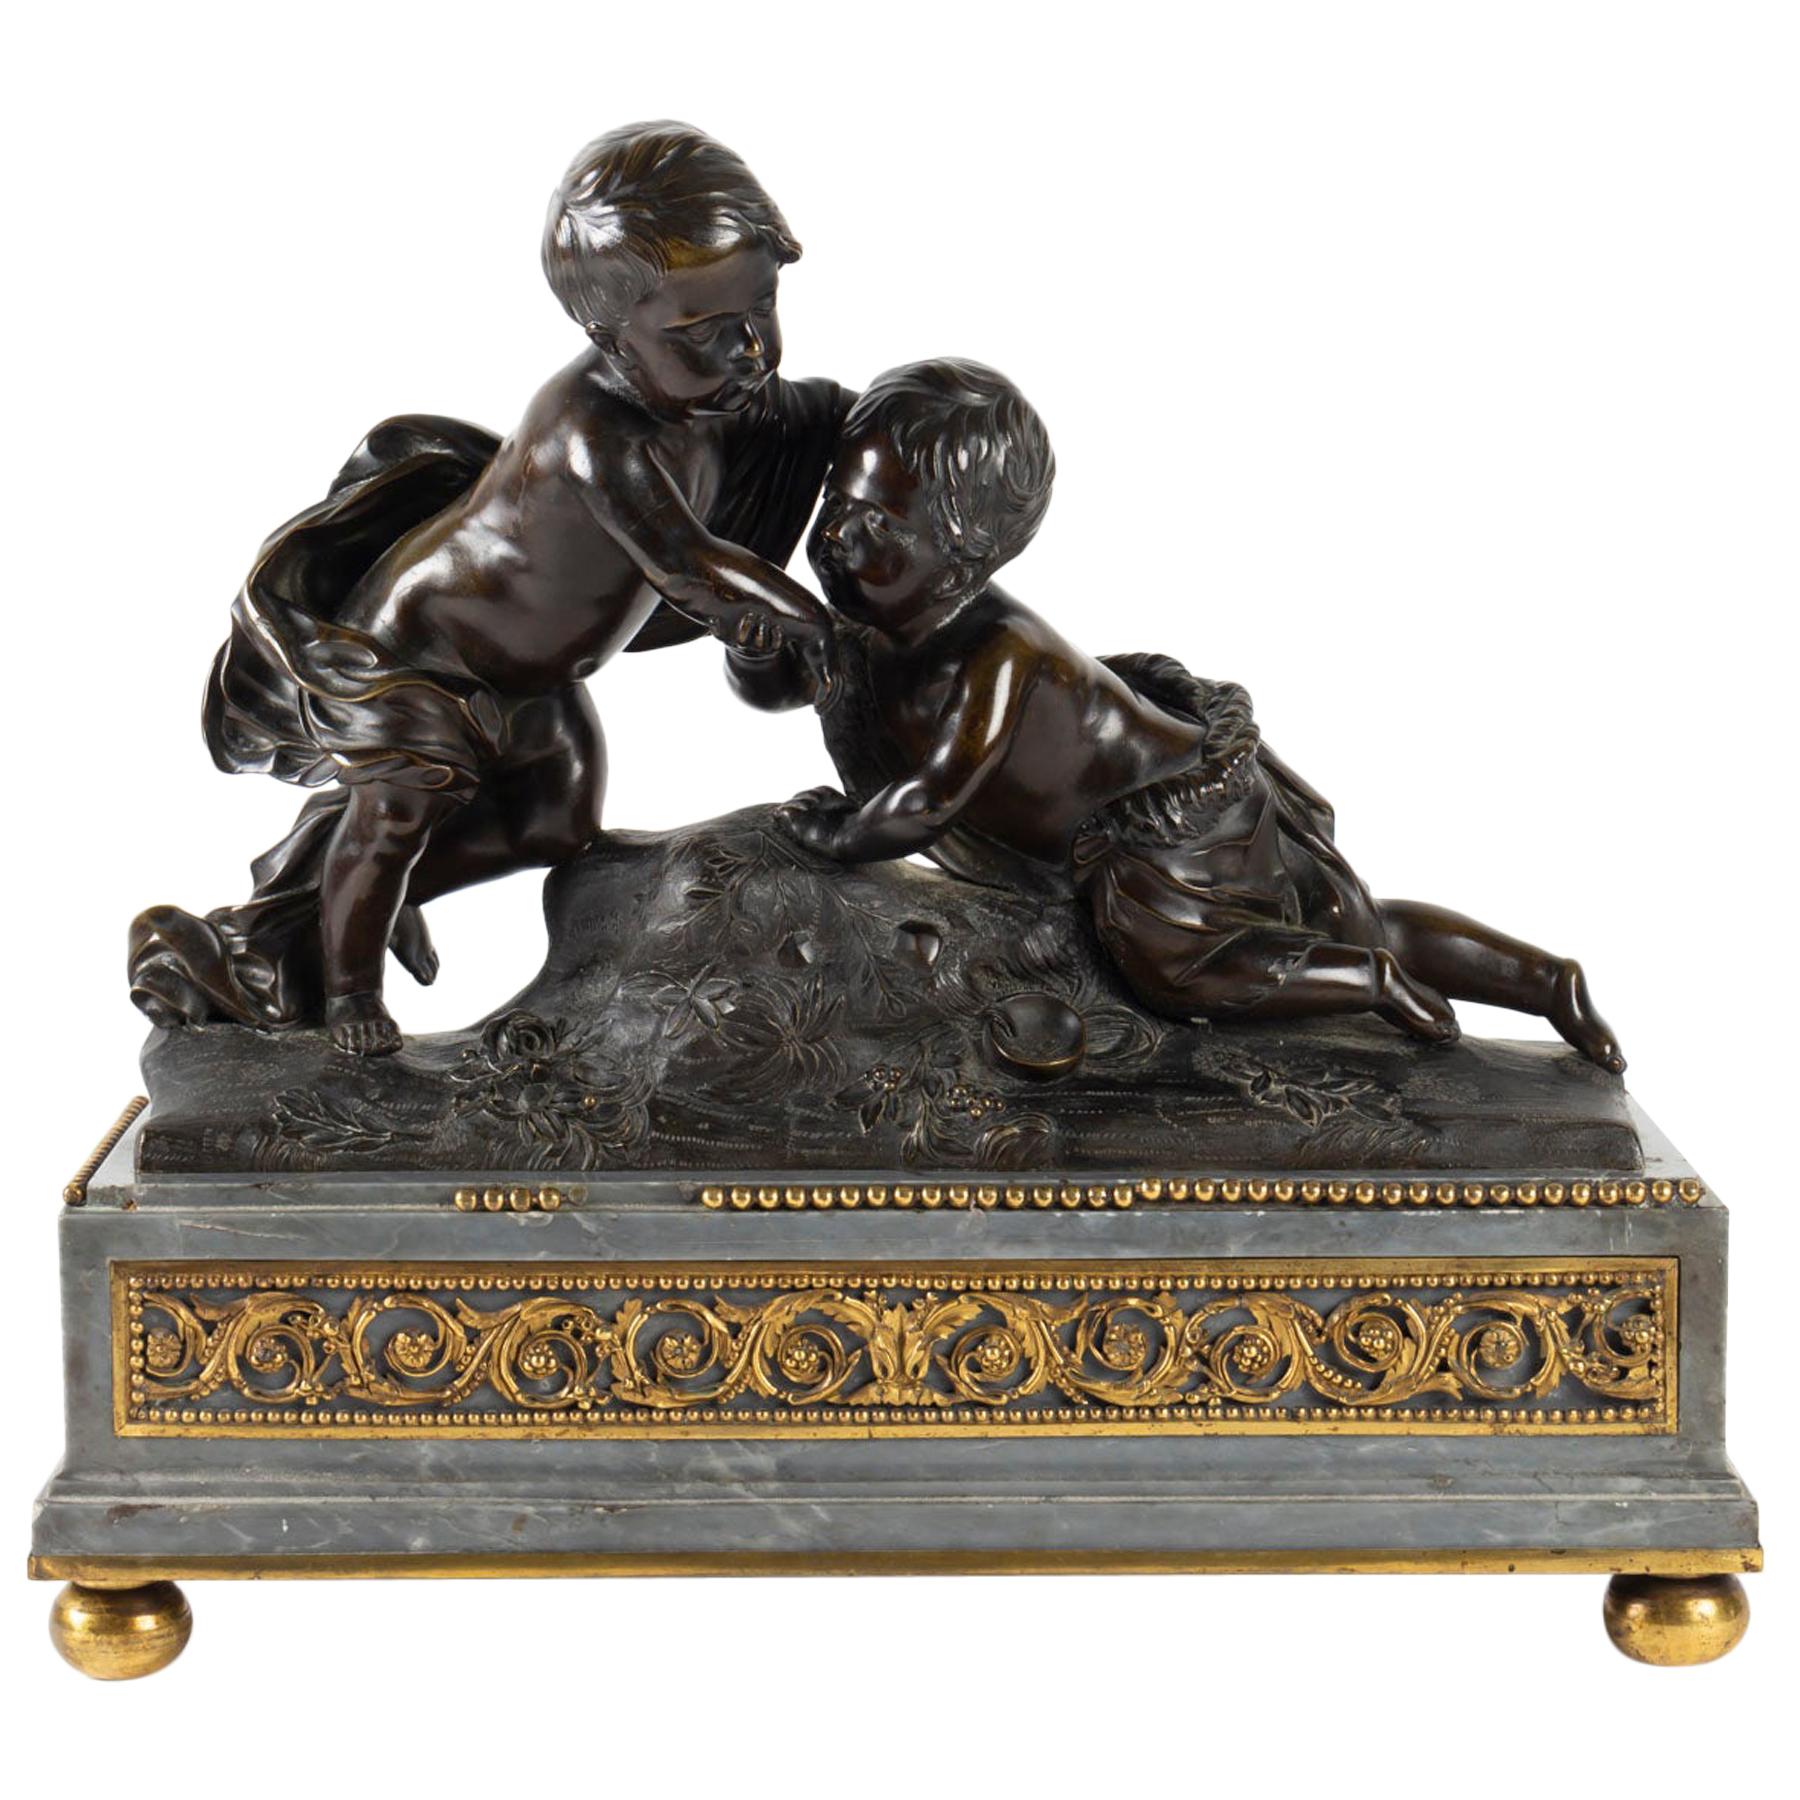 Bronze Sculpture from the 18th Century, from the Louis XVI Period